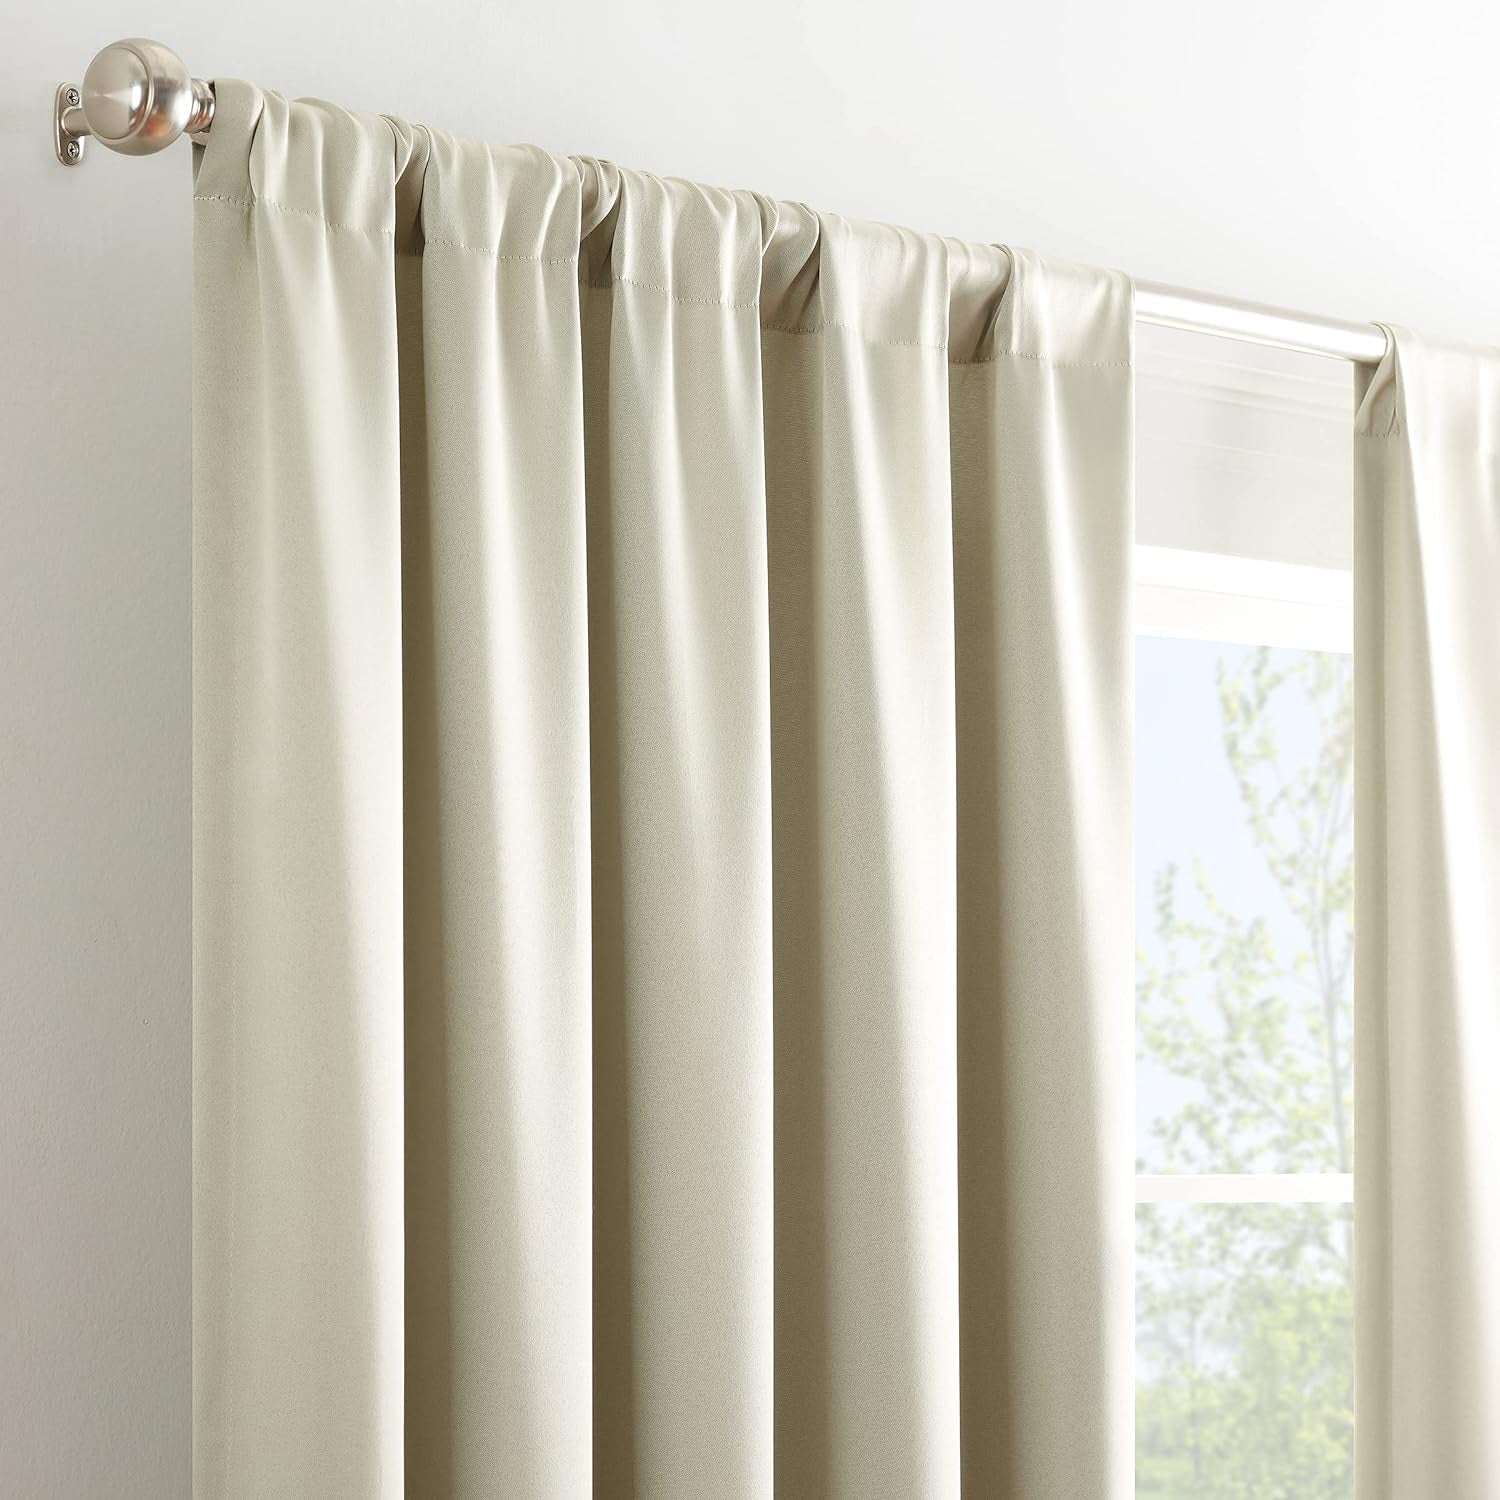 Eclipse Tricia Modern Room Darkening Thermal Rod Pocket Window Curtain for Bedroom (1 Panel), 52 in X 84 In, Stone  Keeco LLC   